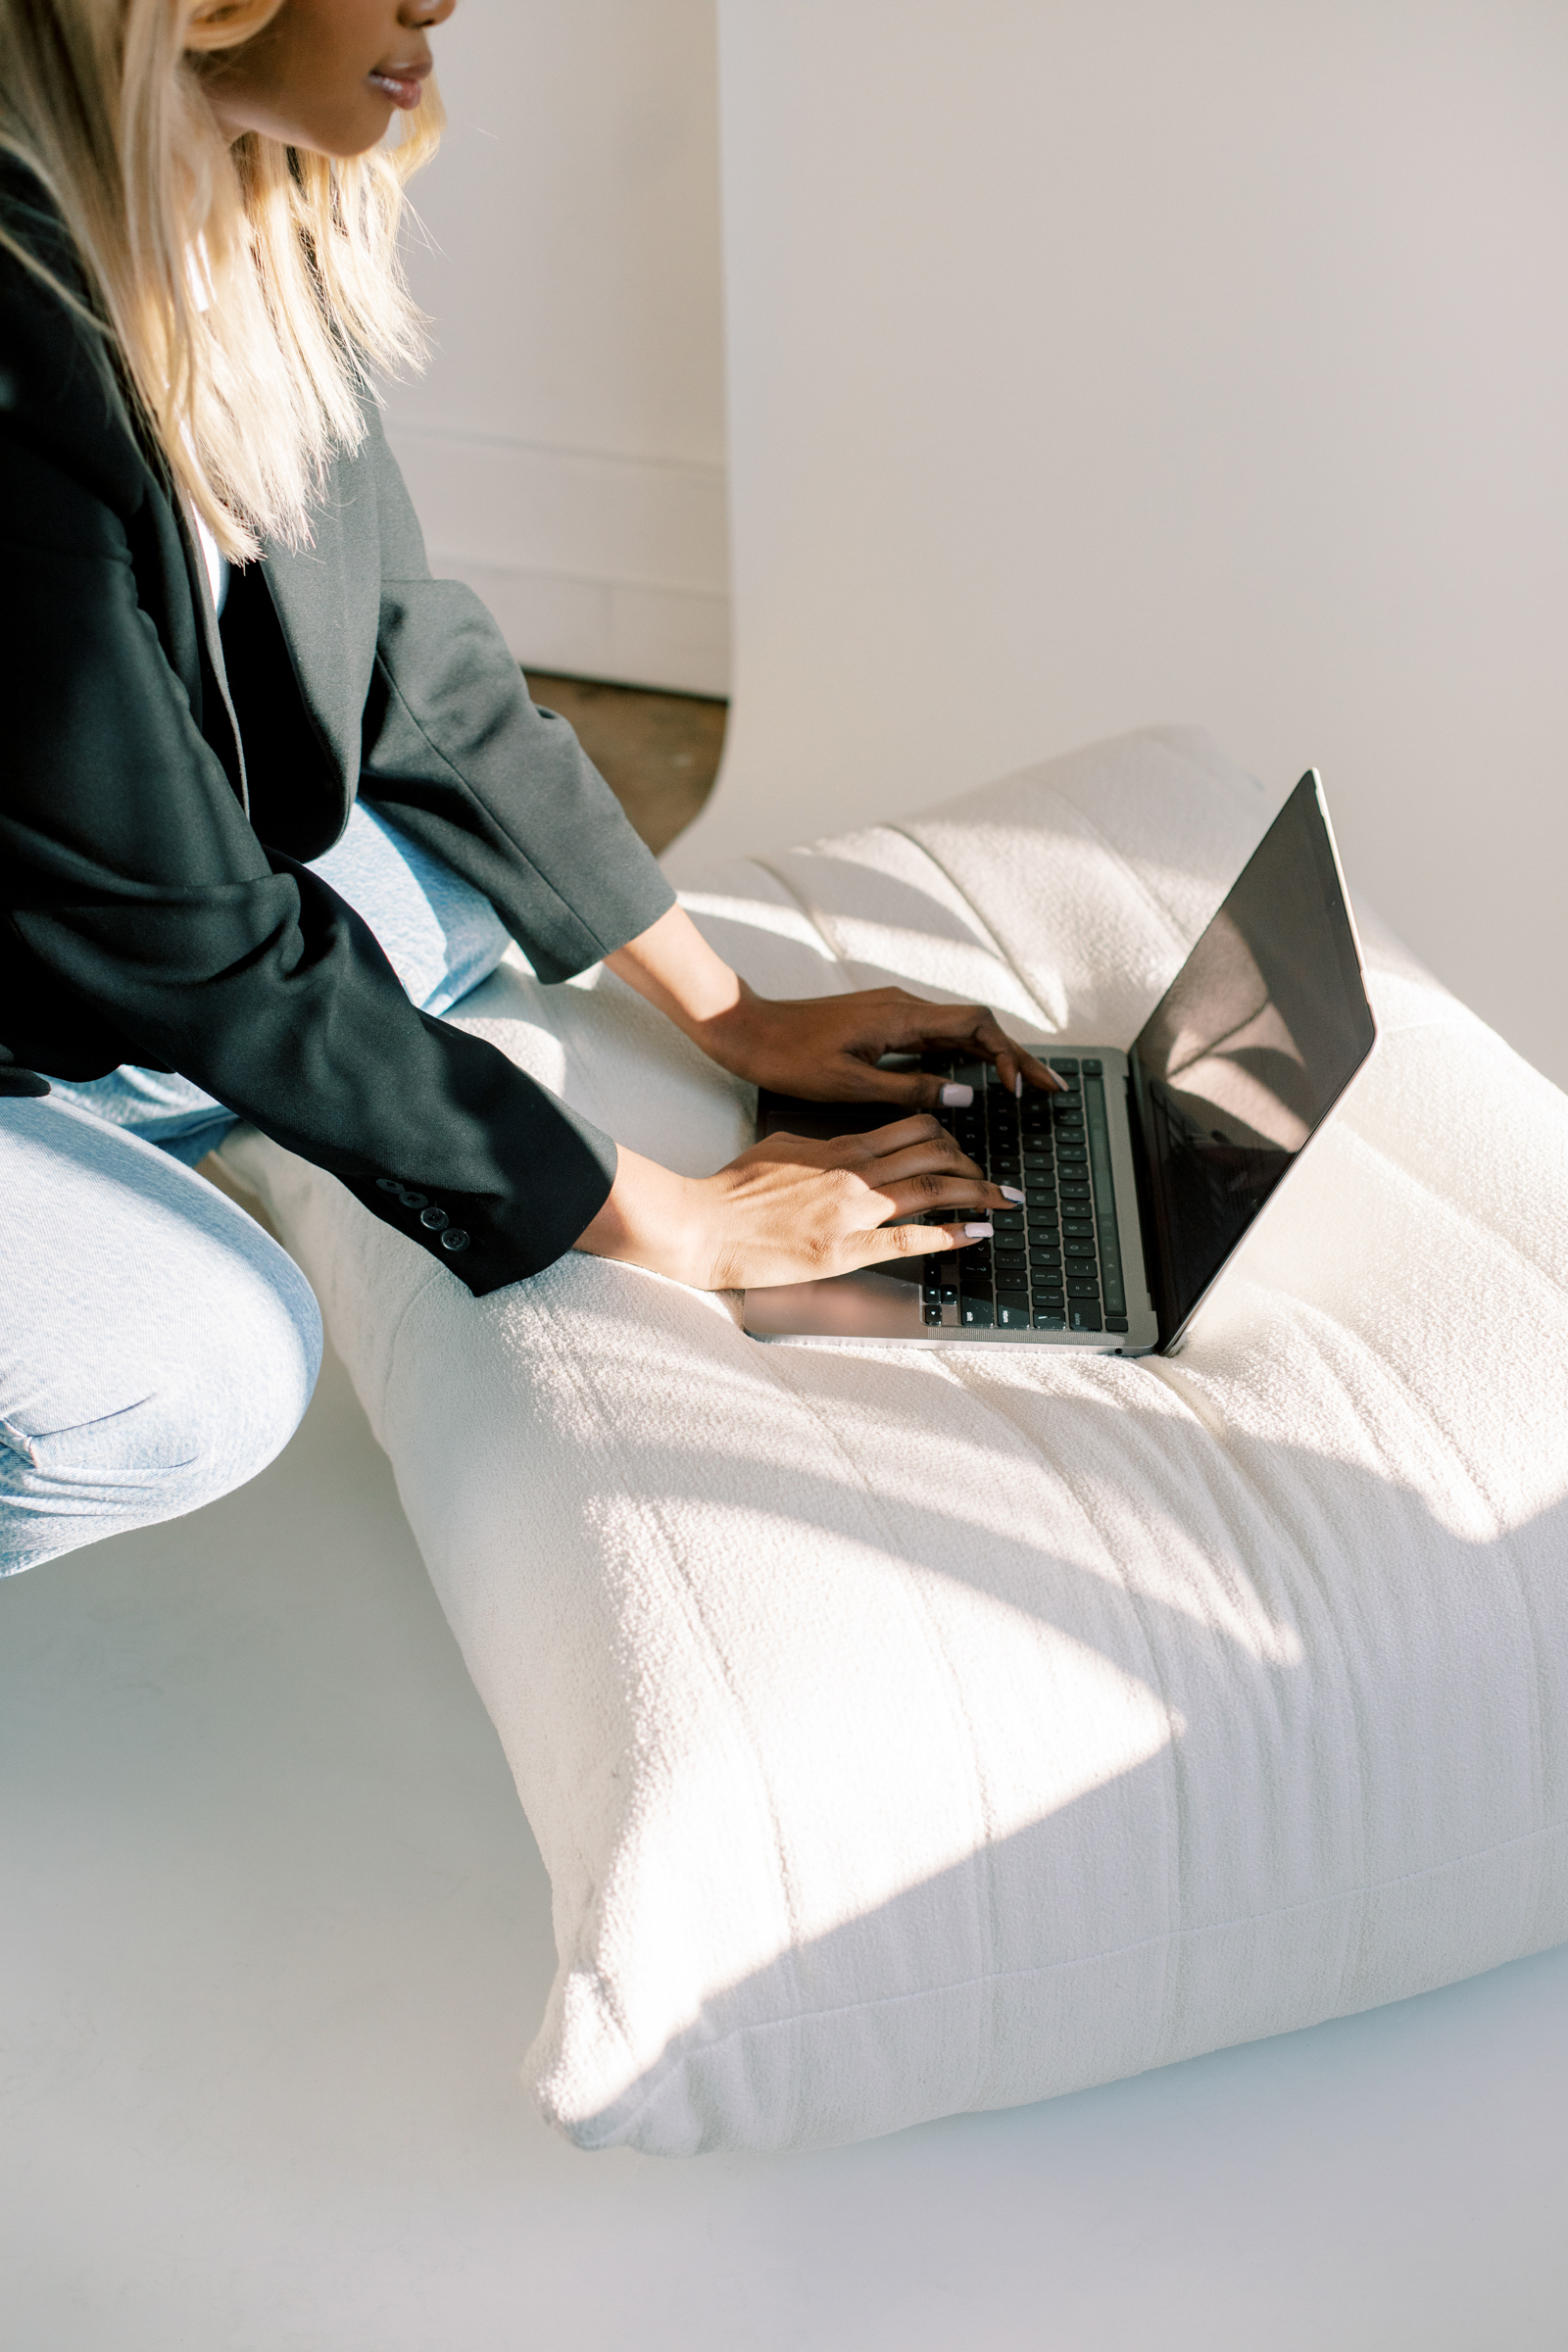 A person using a laptop on a large white cushion, likely crafting the perfect lead magnet.